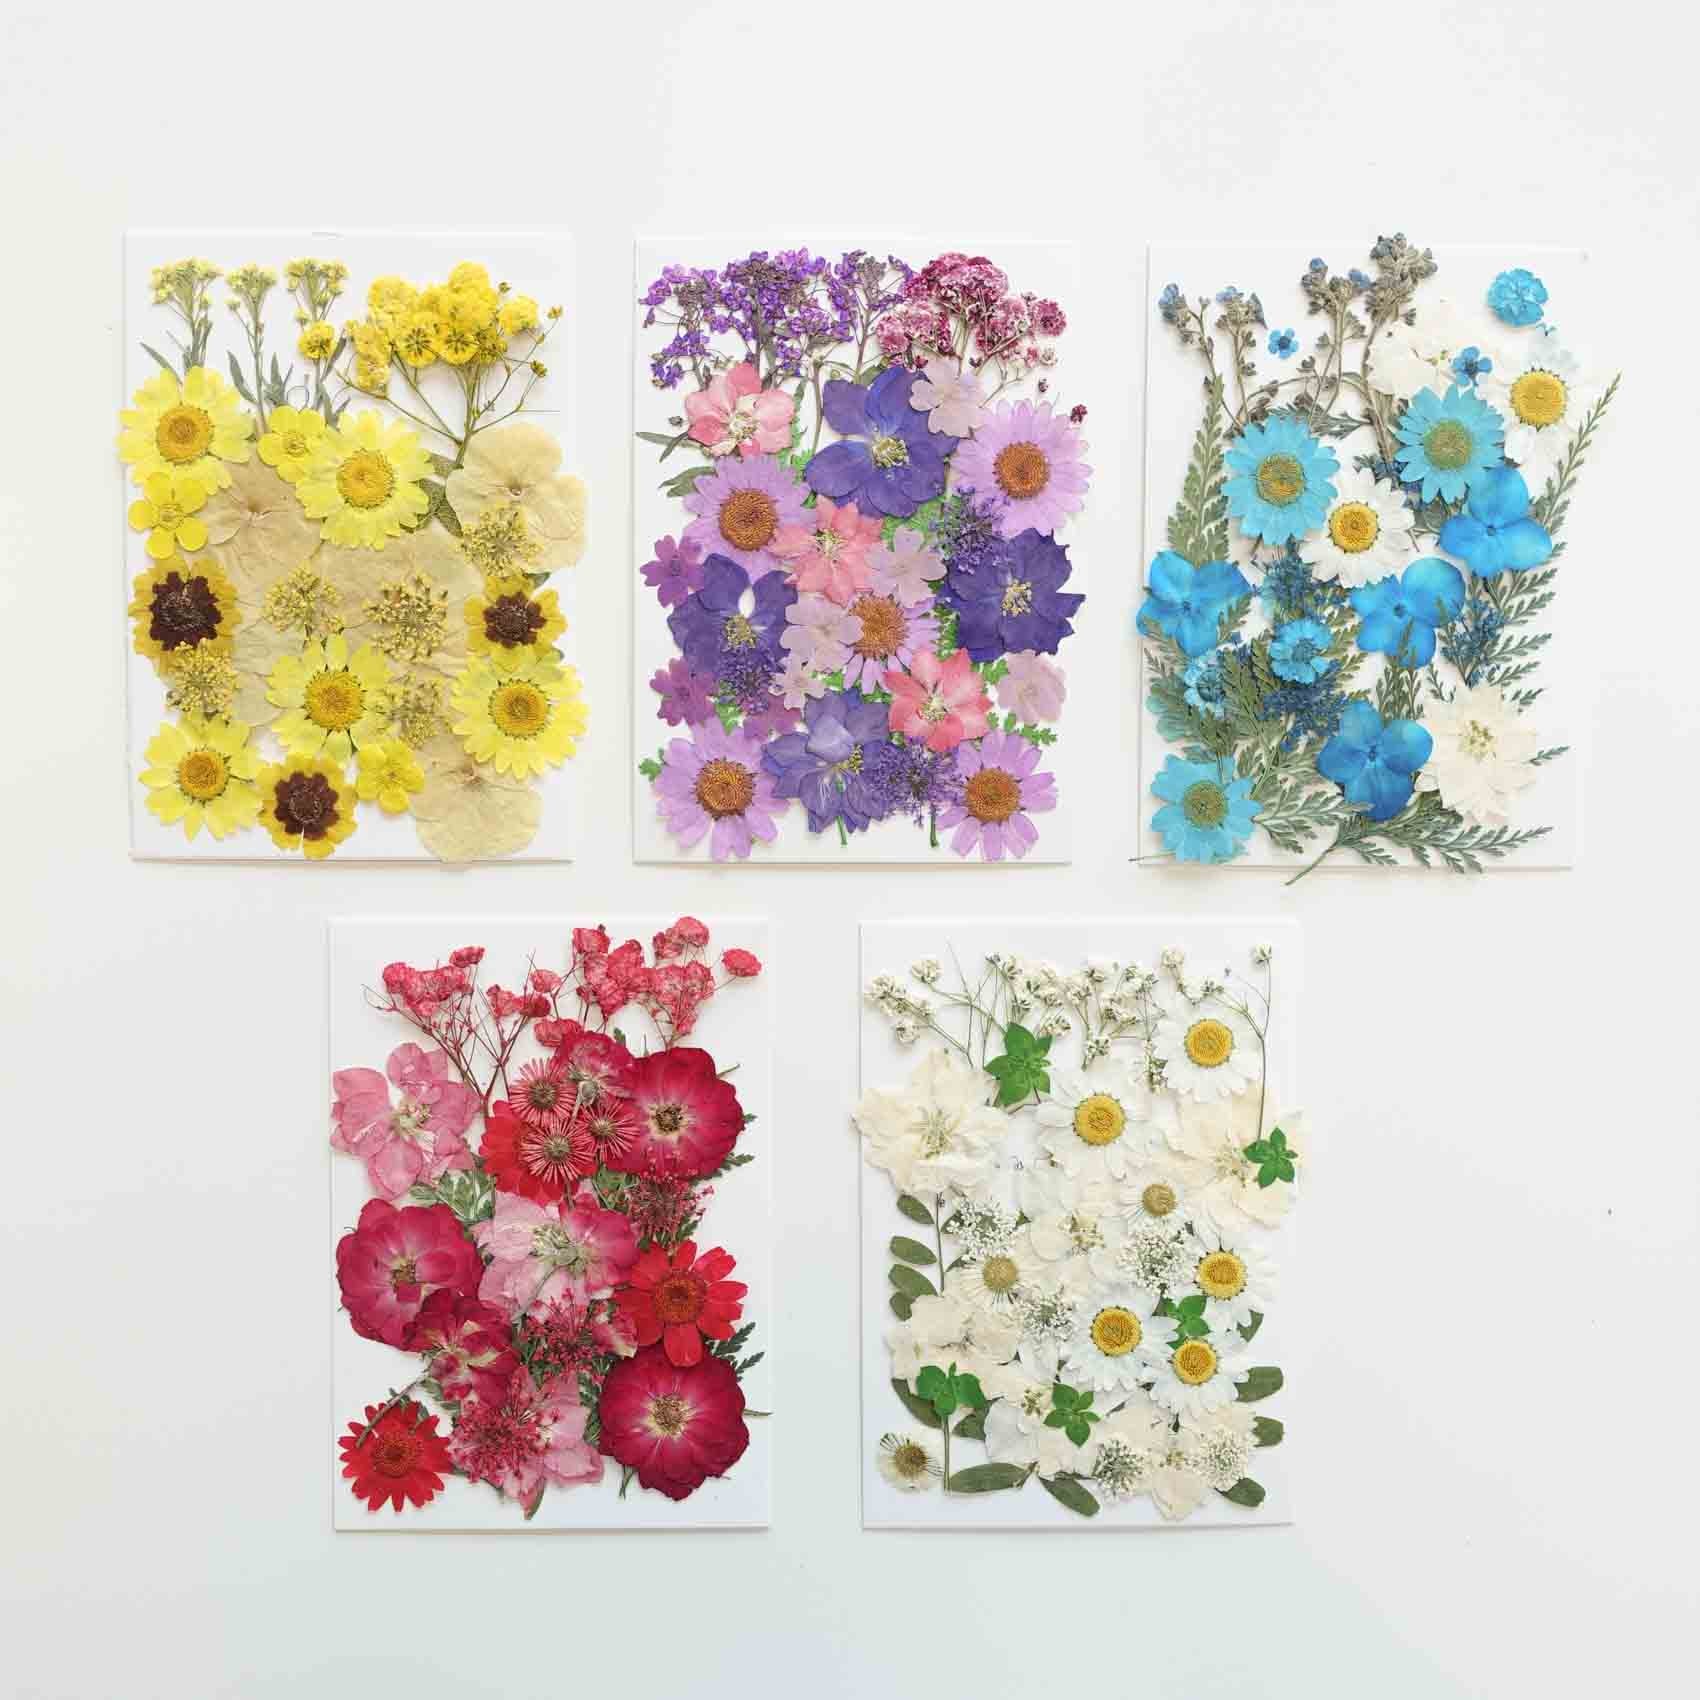 red rose daisy hydrangea pressed dried flowers australia for resin art wax seal crafts